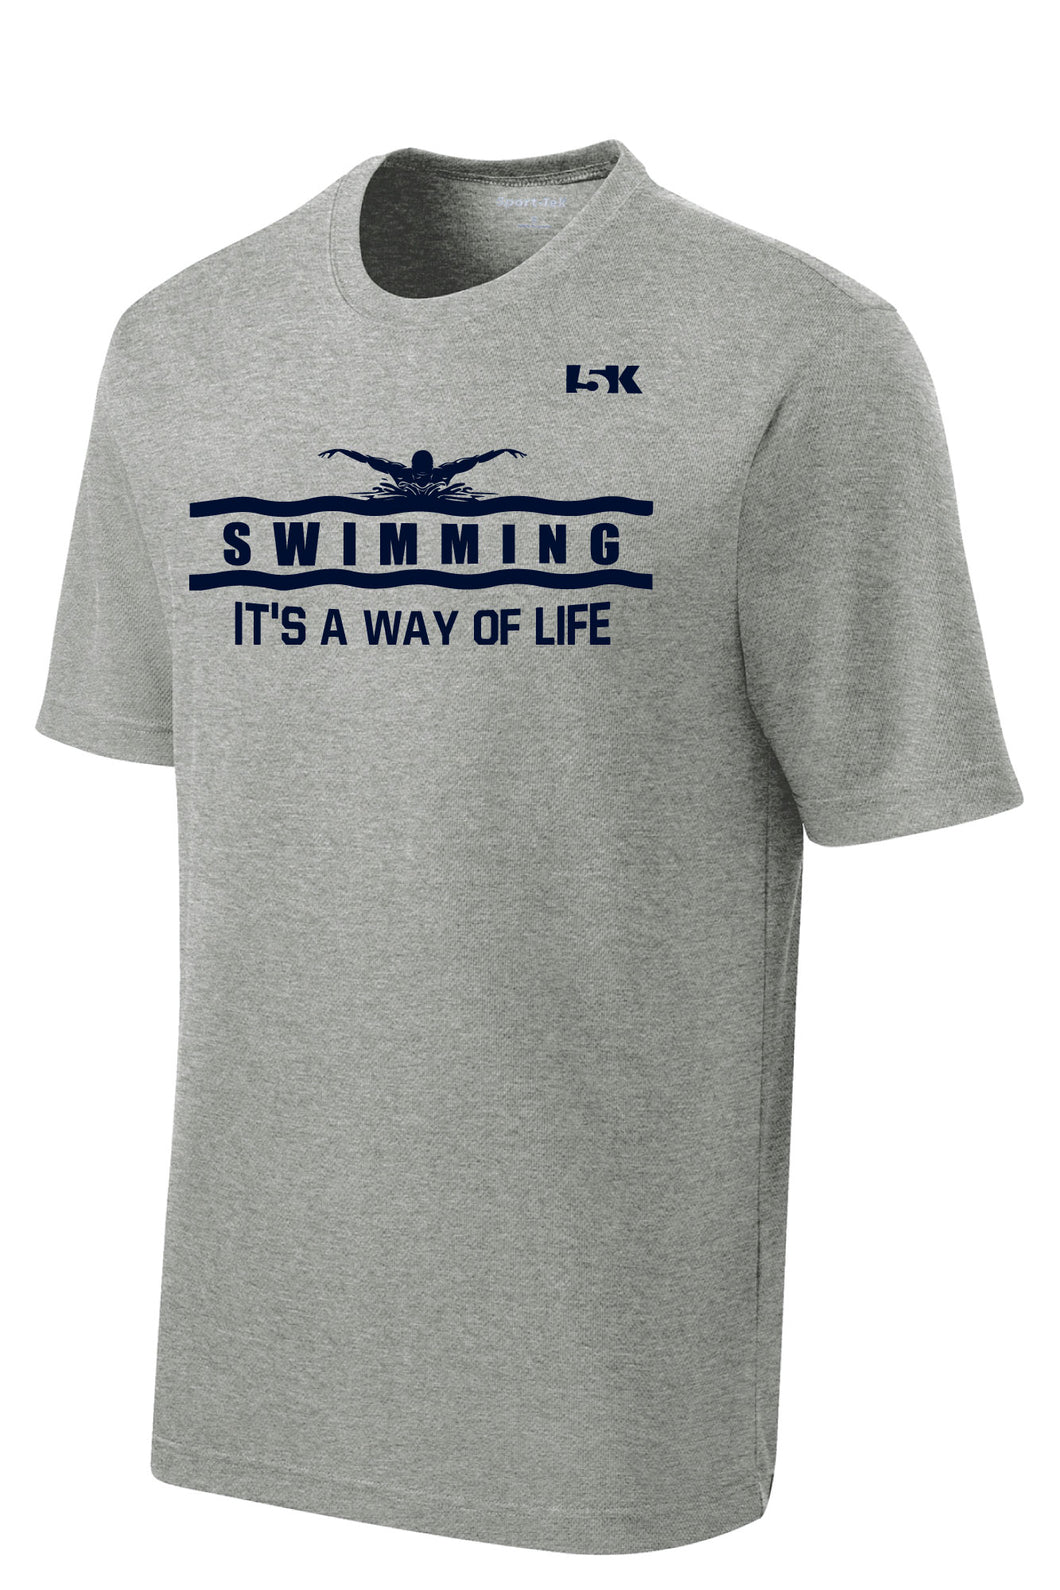 Swimming is a Way of Life Dryfit Performance Tee - Grey - 5KounT2018